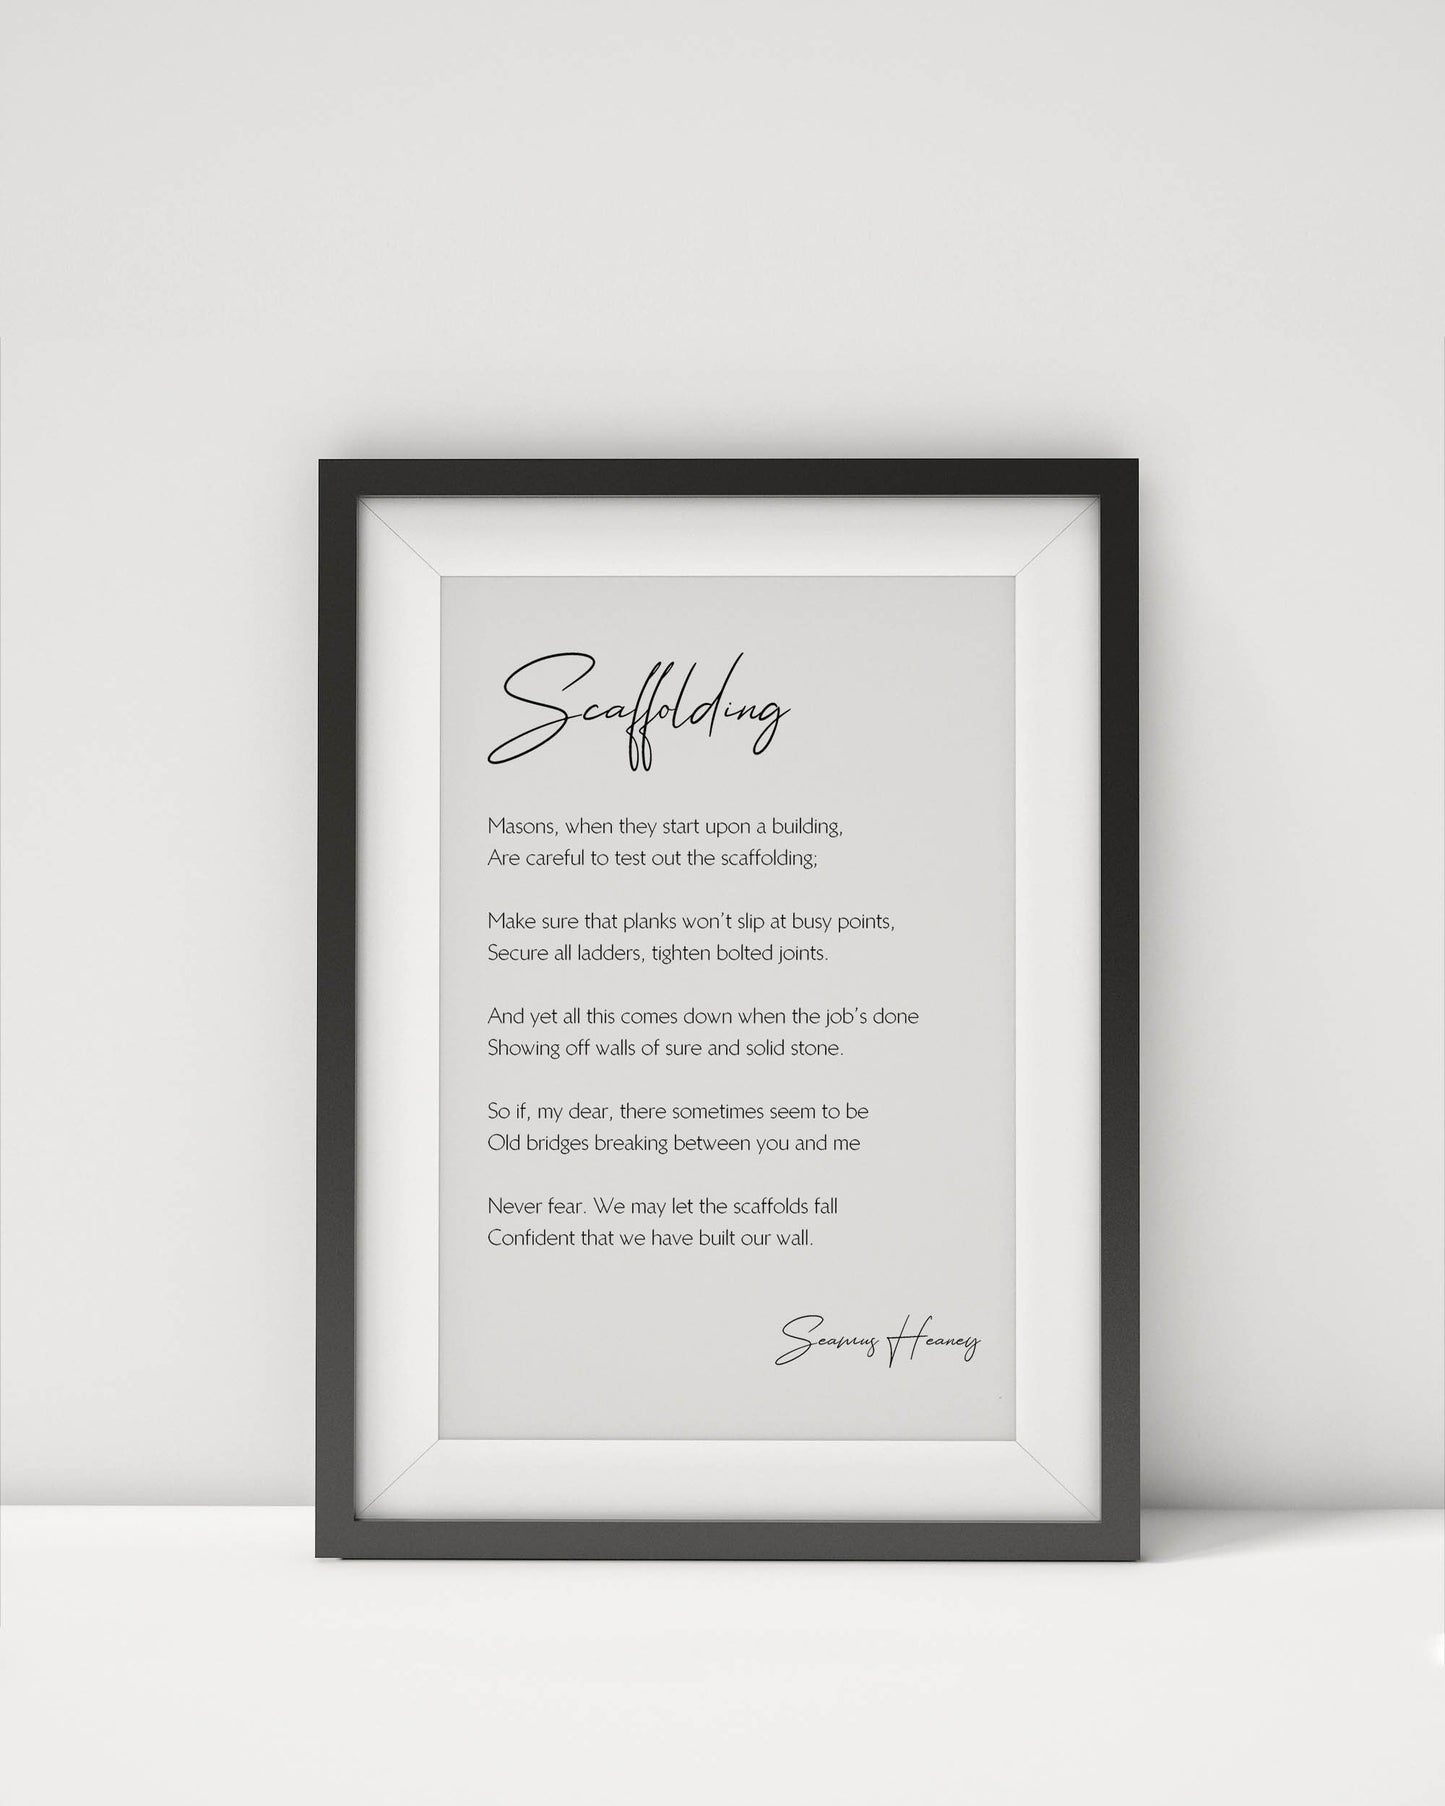 Scaffolding Print by Seamus Heaney - Framed Poster - Poet Seamus Heaney - Scaffolding Poetry - Building Strong relationships with trust